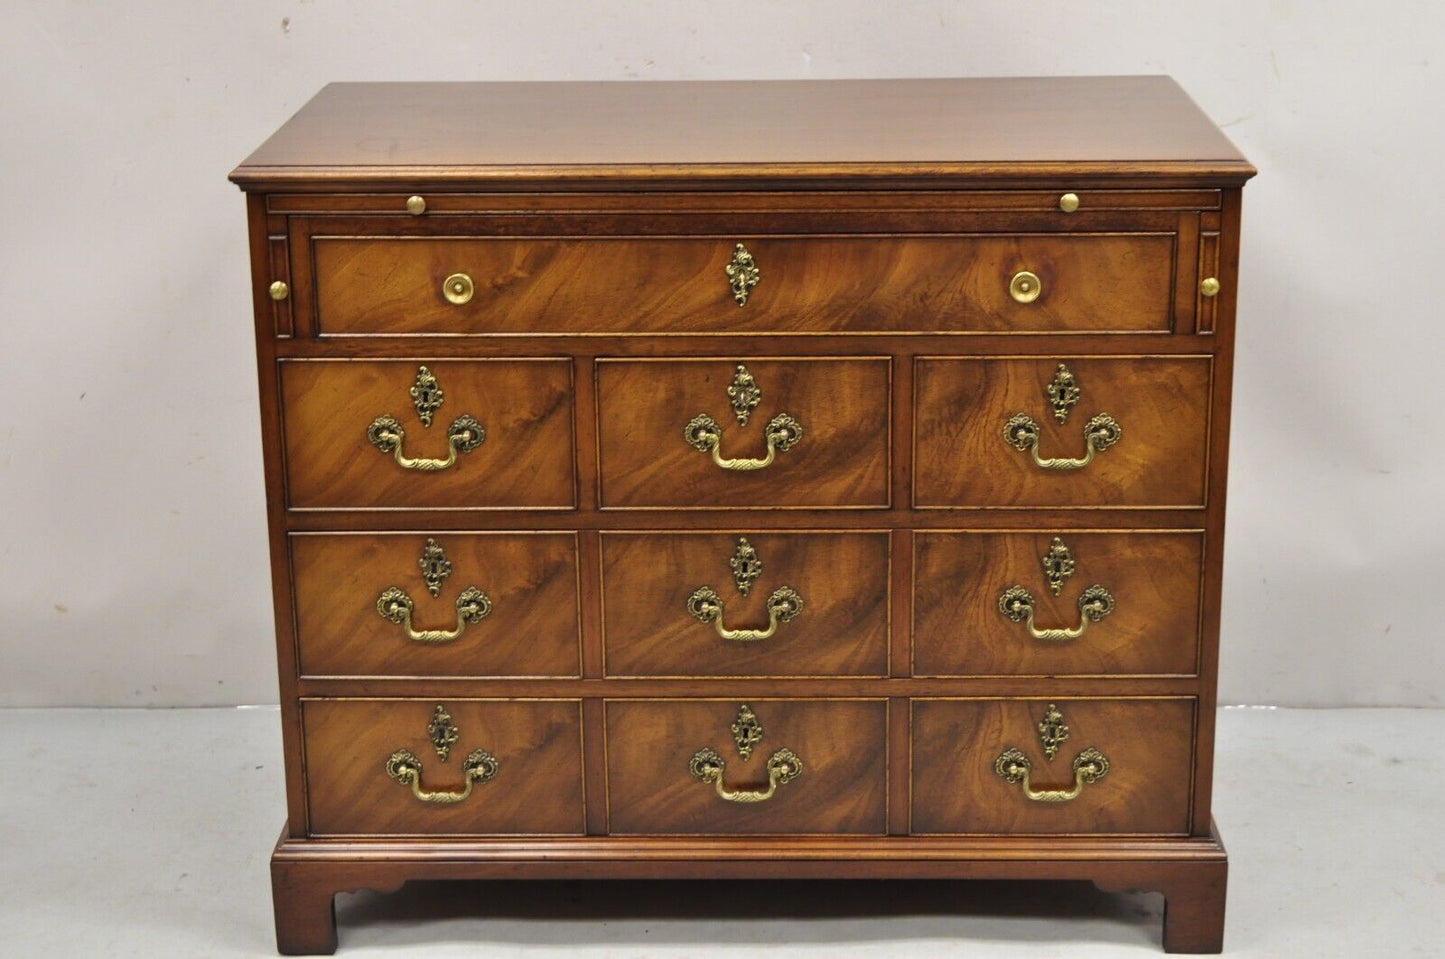 Beacon Hill Georgian Style Mahogany Commode Bachelor Chest of Drawers Server